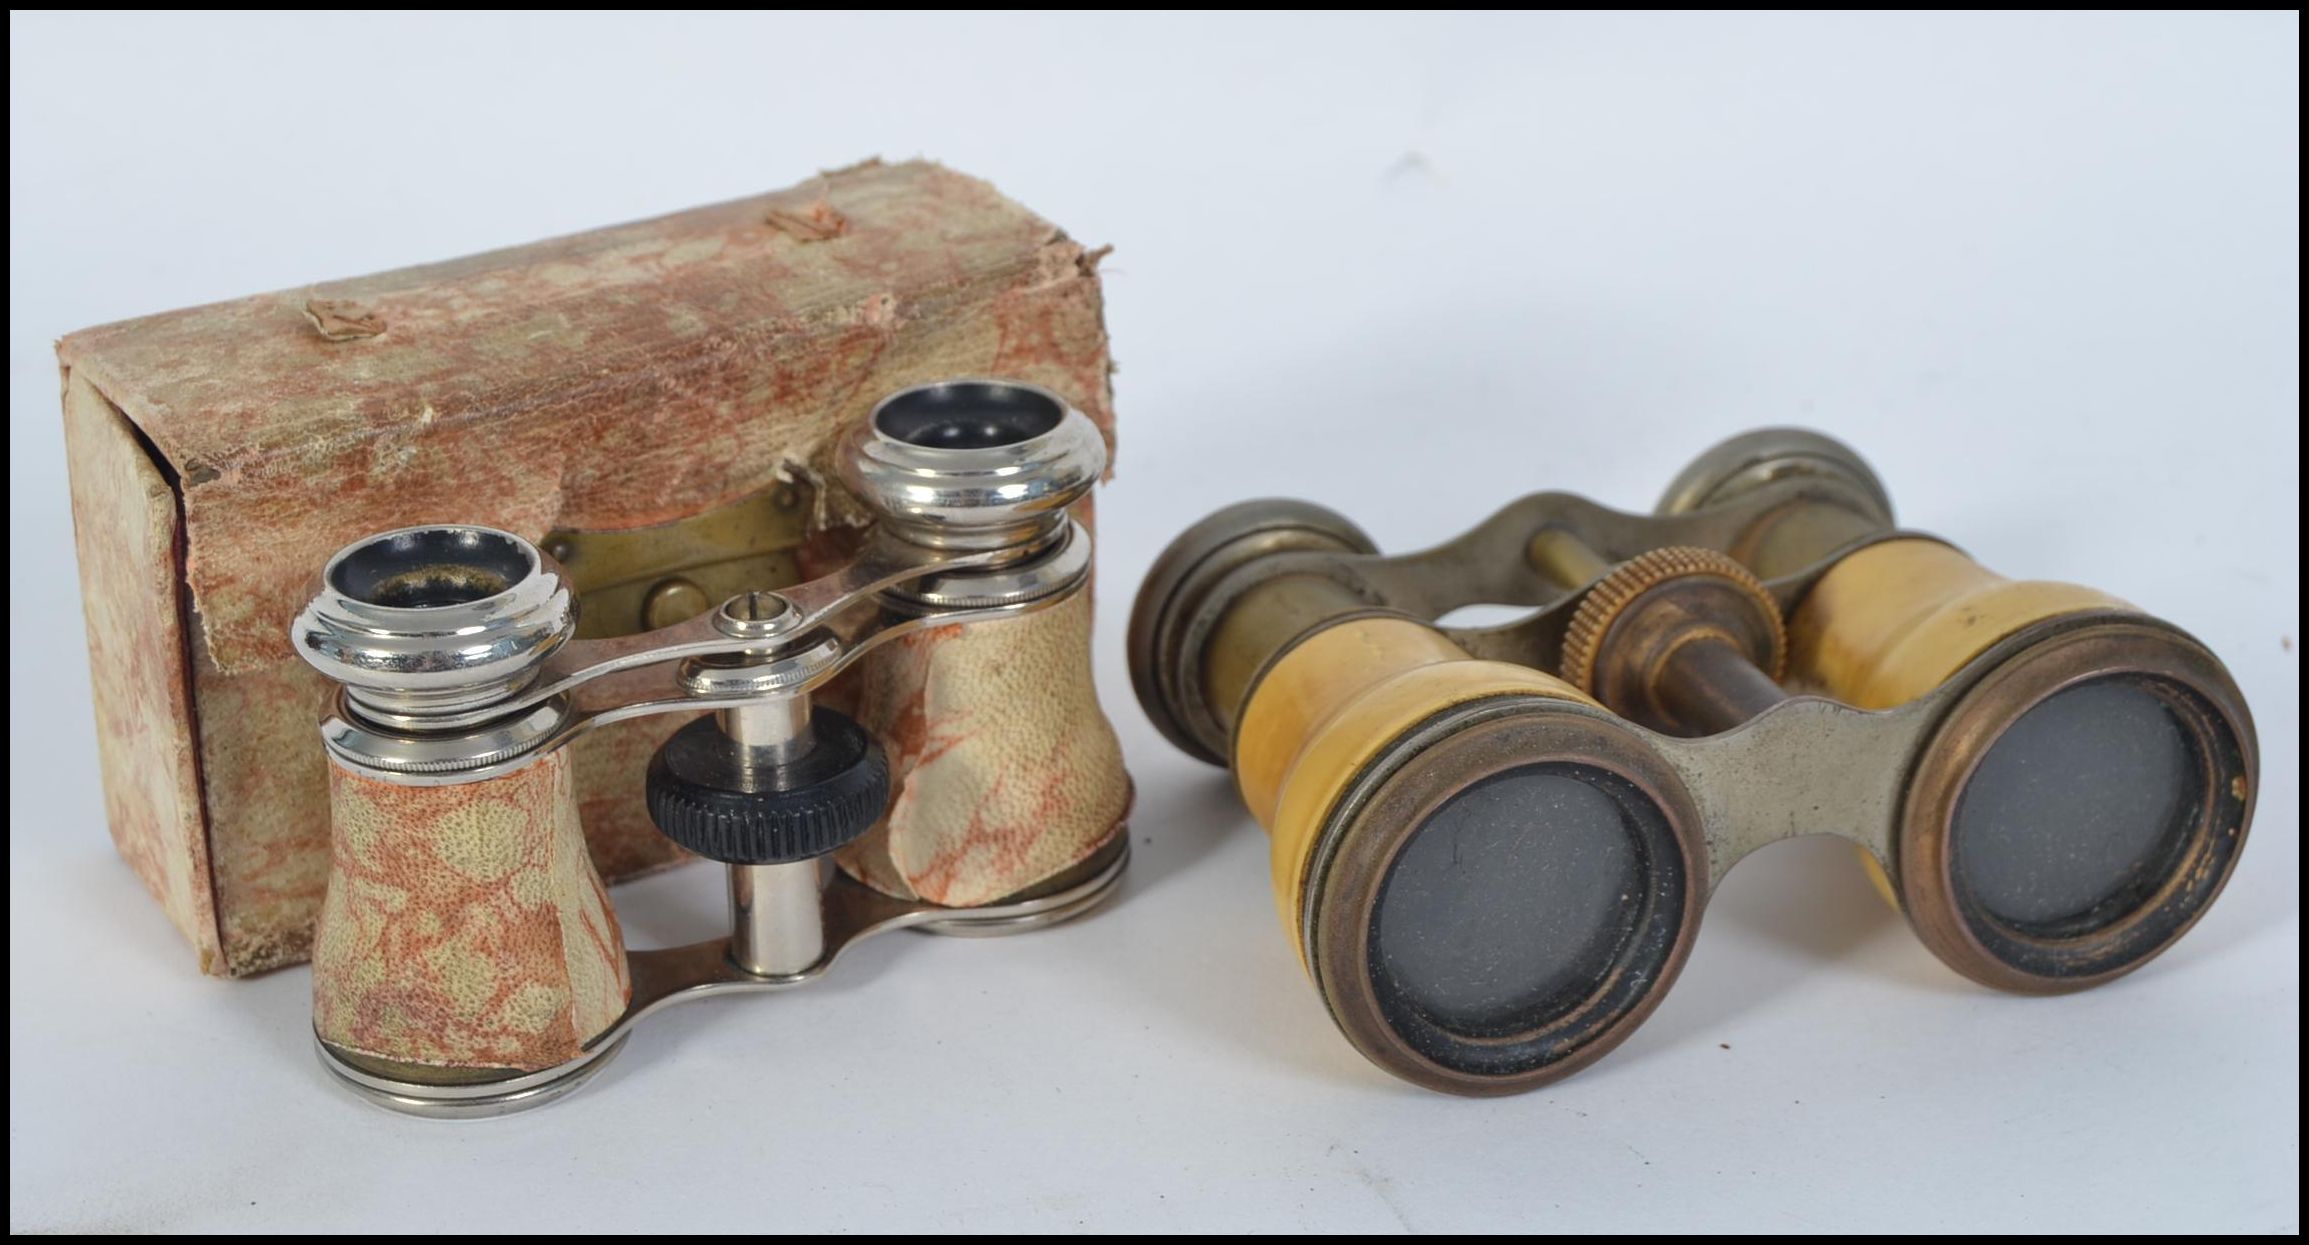 A pair of 19th / 20th century opera glasses along with another pair retaining it's original case